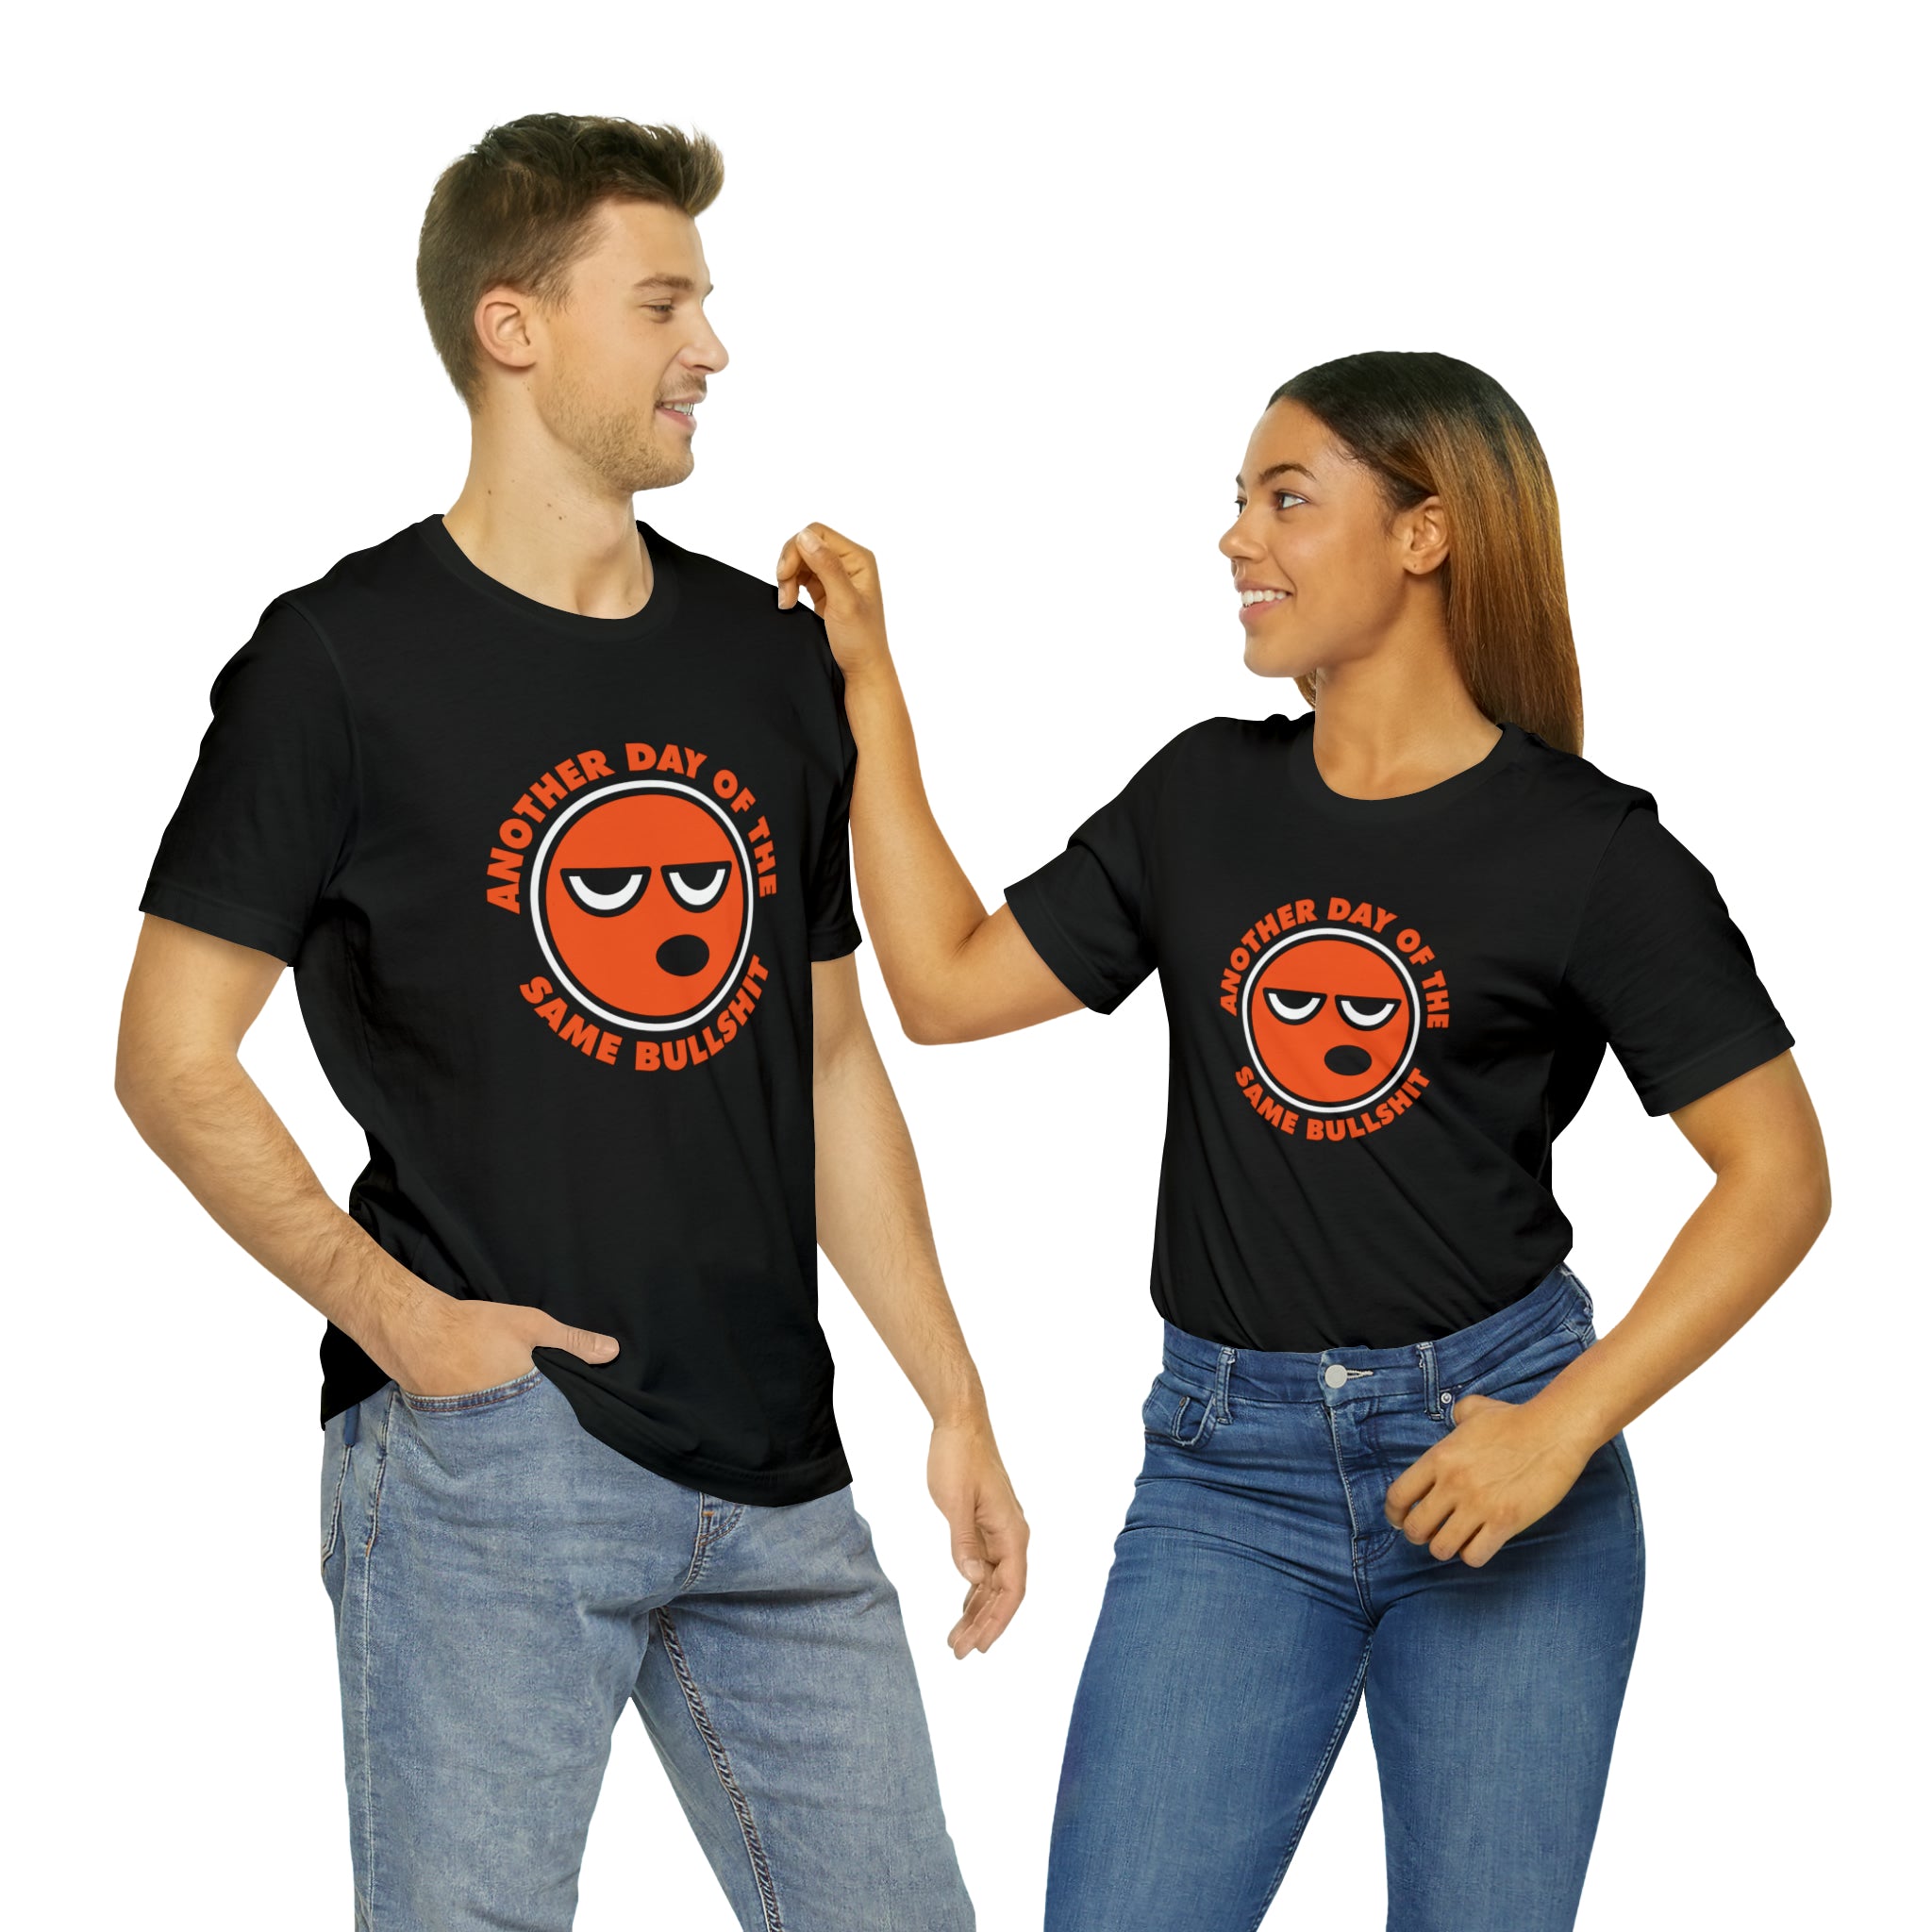 A man and woman in matching Another Day of the Same Bullshit T-shirts exuding attitude.